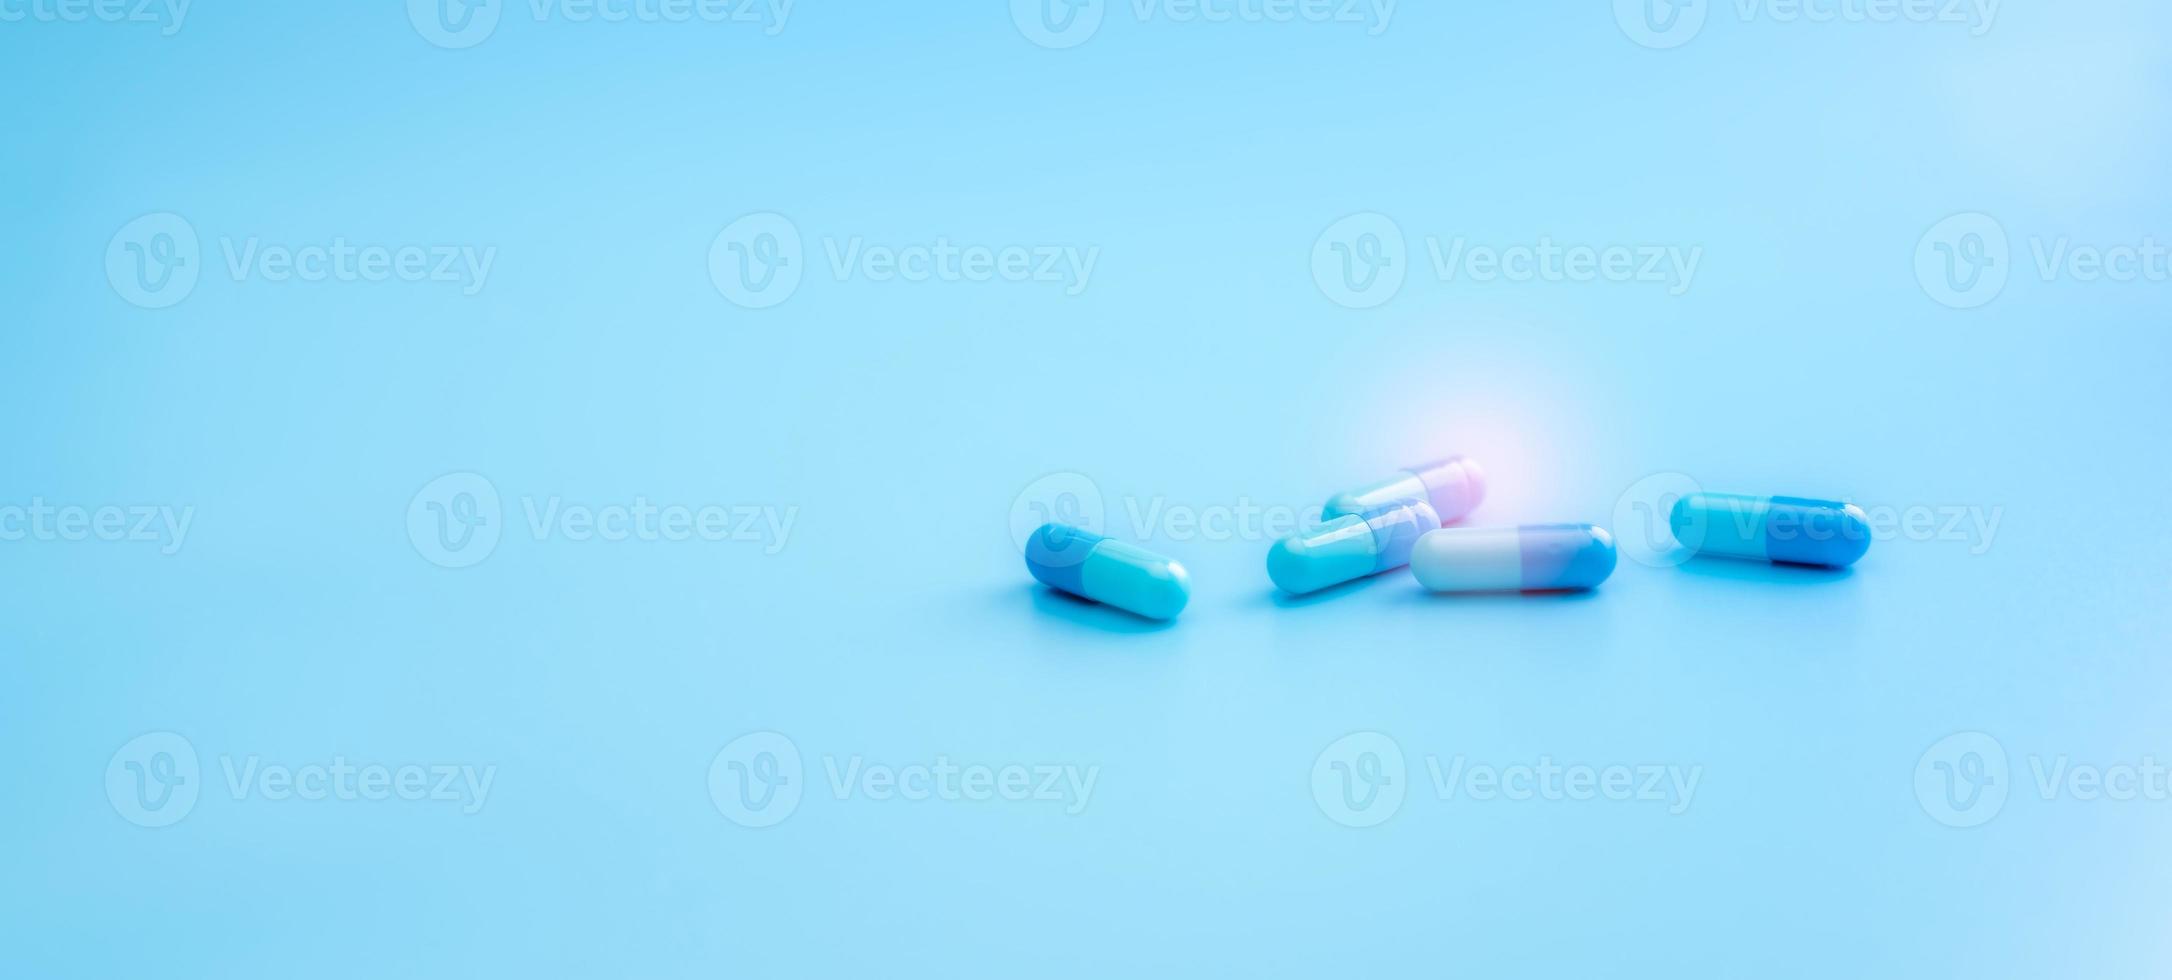 Blue capsule pills on blue background. Pharmacy shop banner. Healthcare and medicine. Pharmaceutical industry. Drug research and development for treatment coronavirus infection. Antiviral medicine. photo